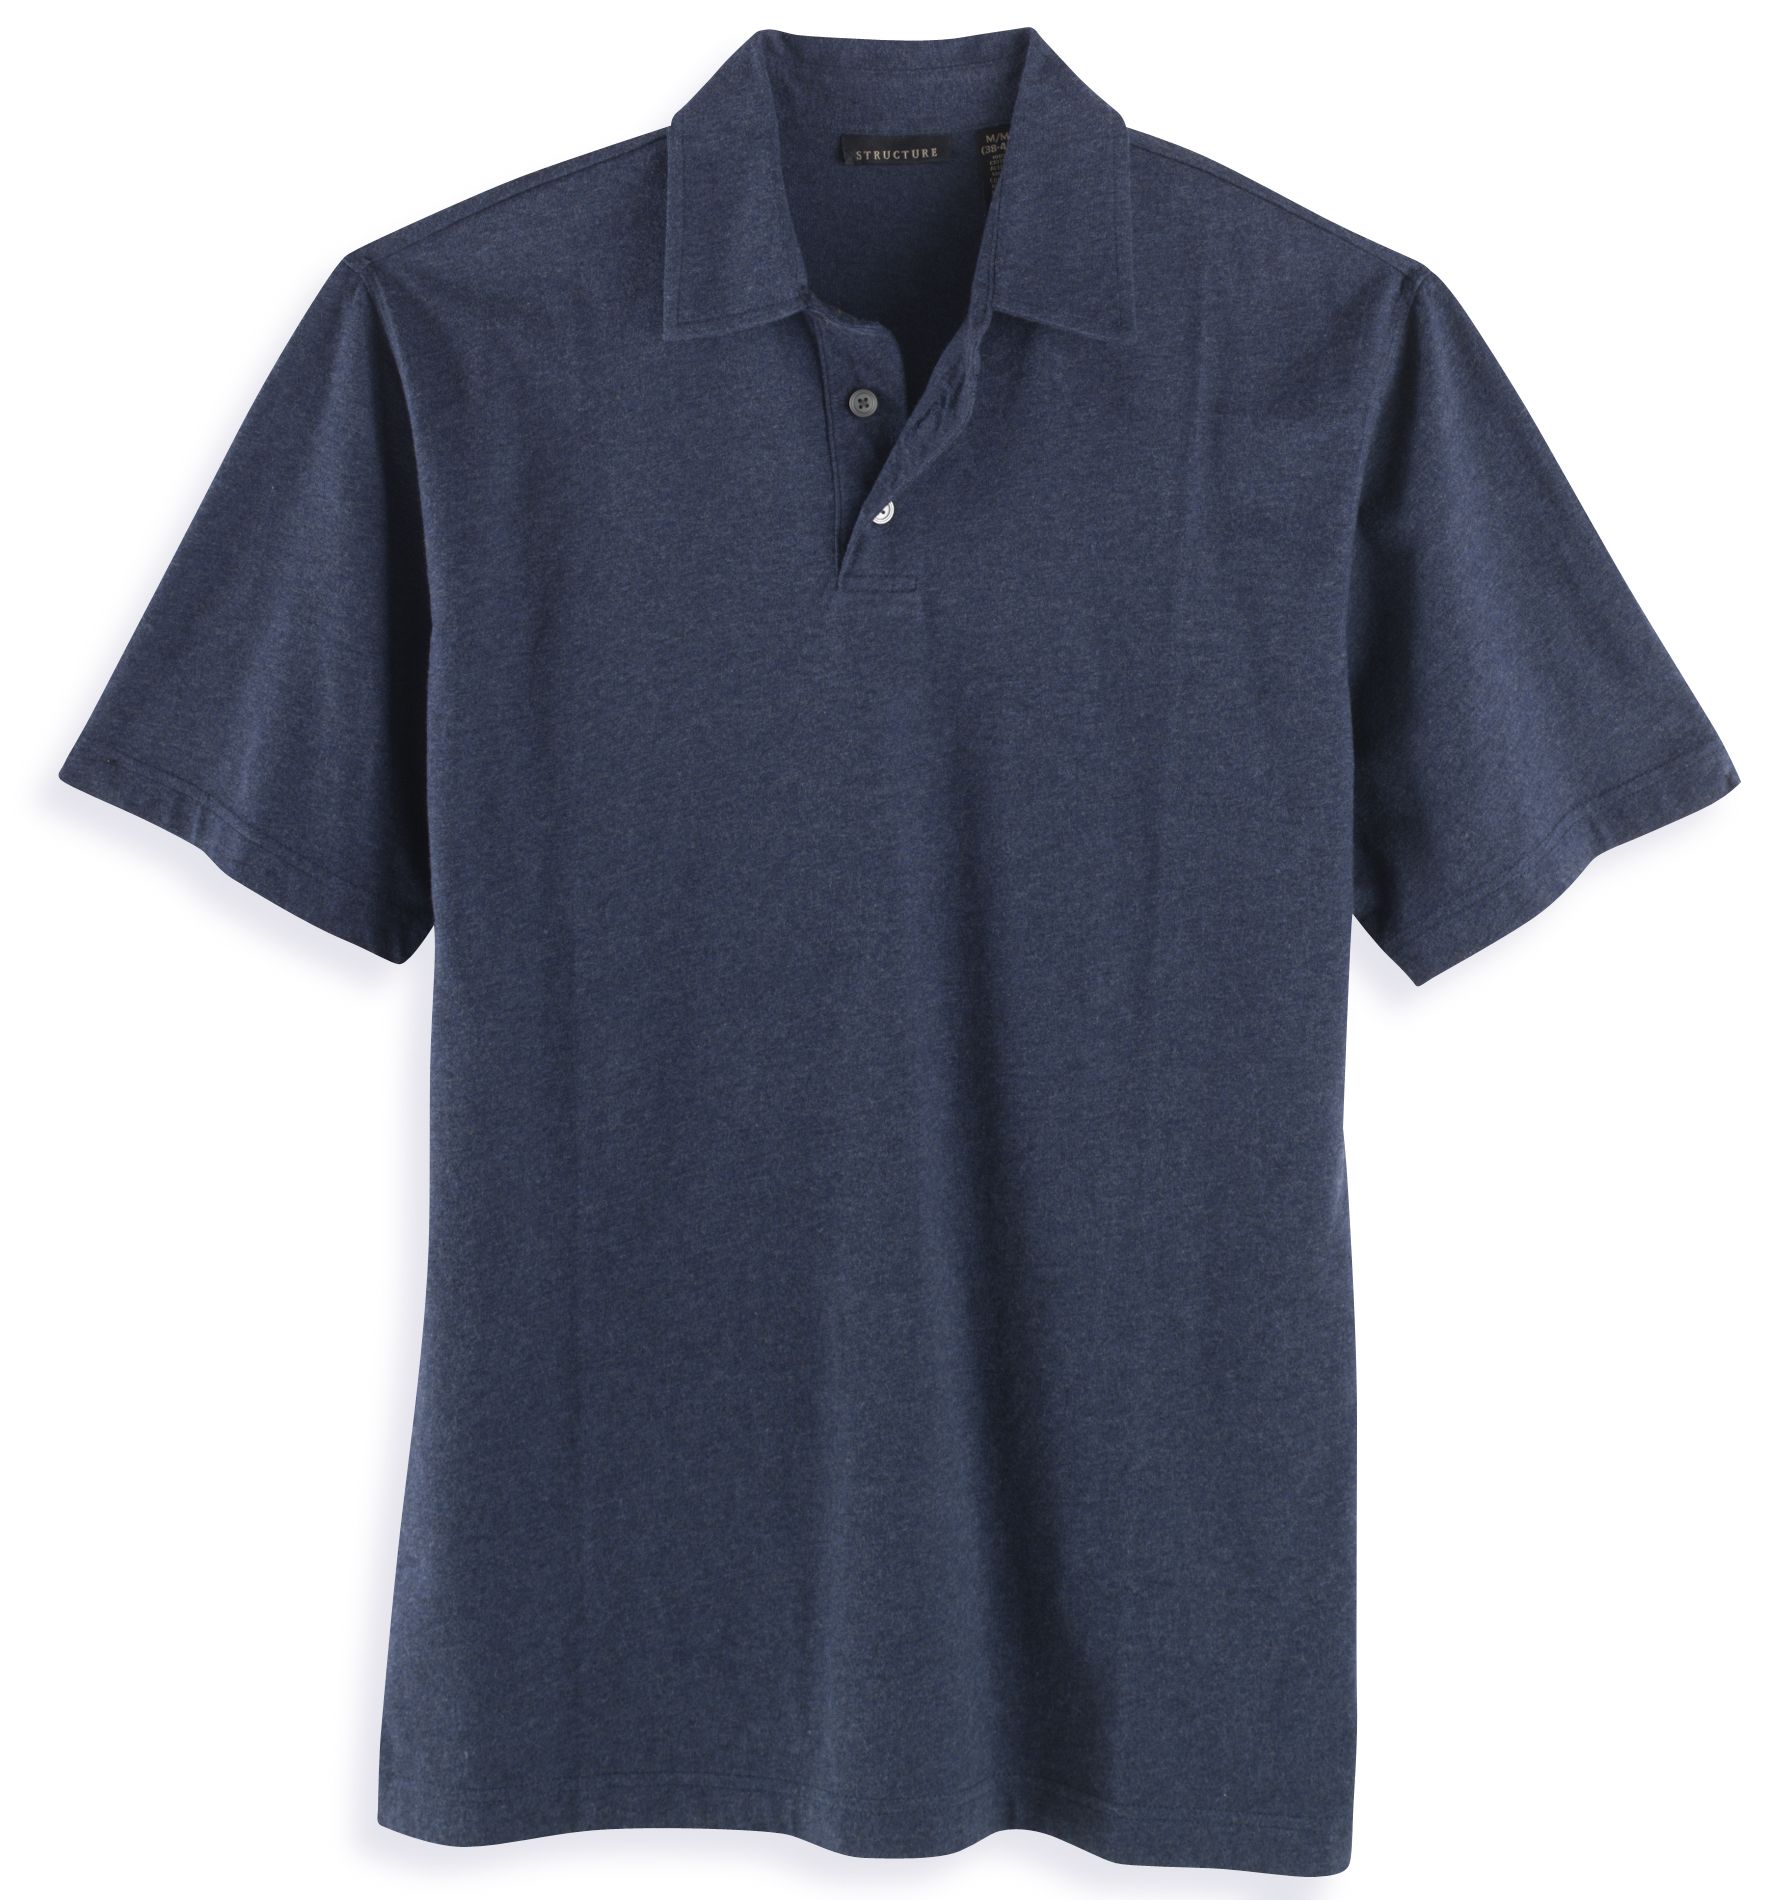 Structure Short Sleeve Jersey Polo